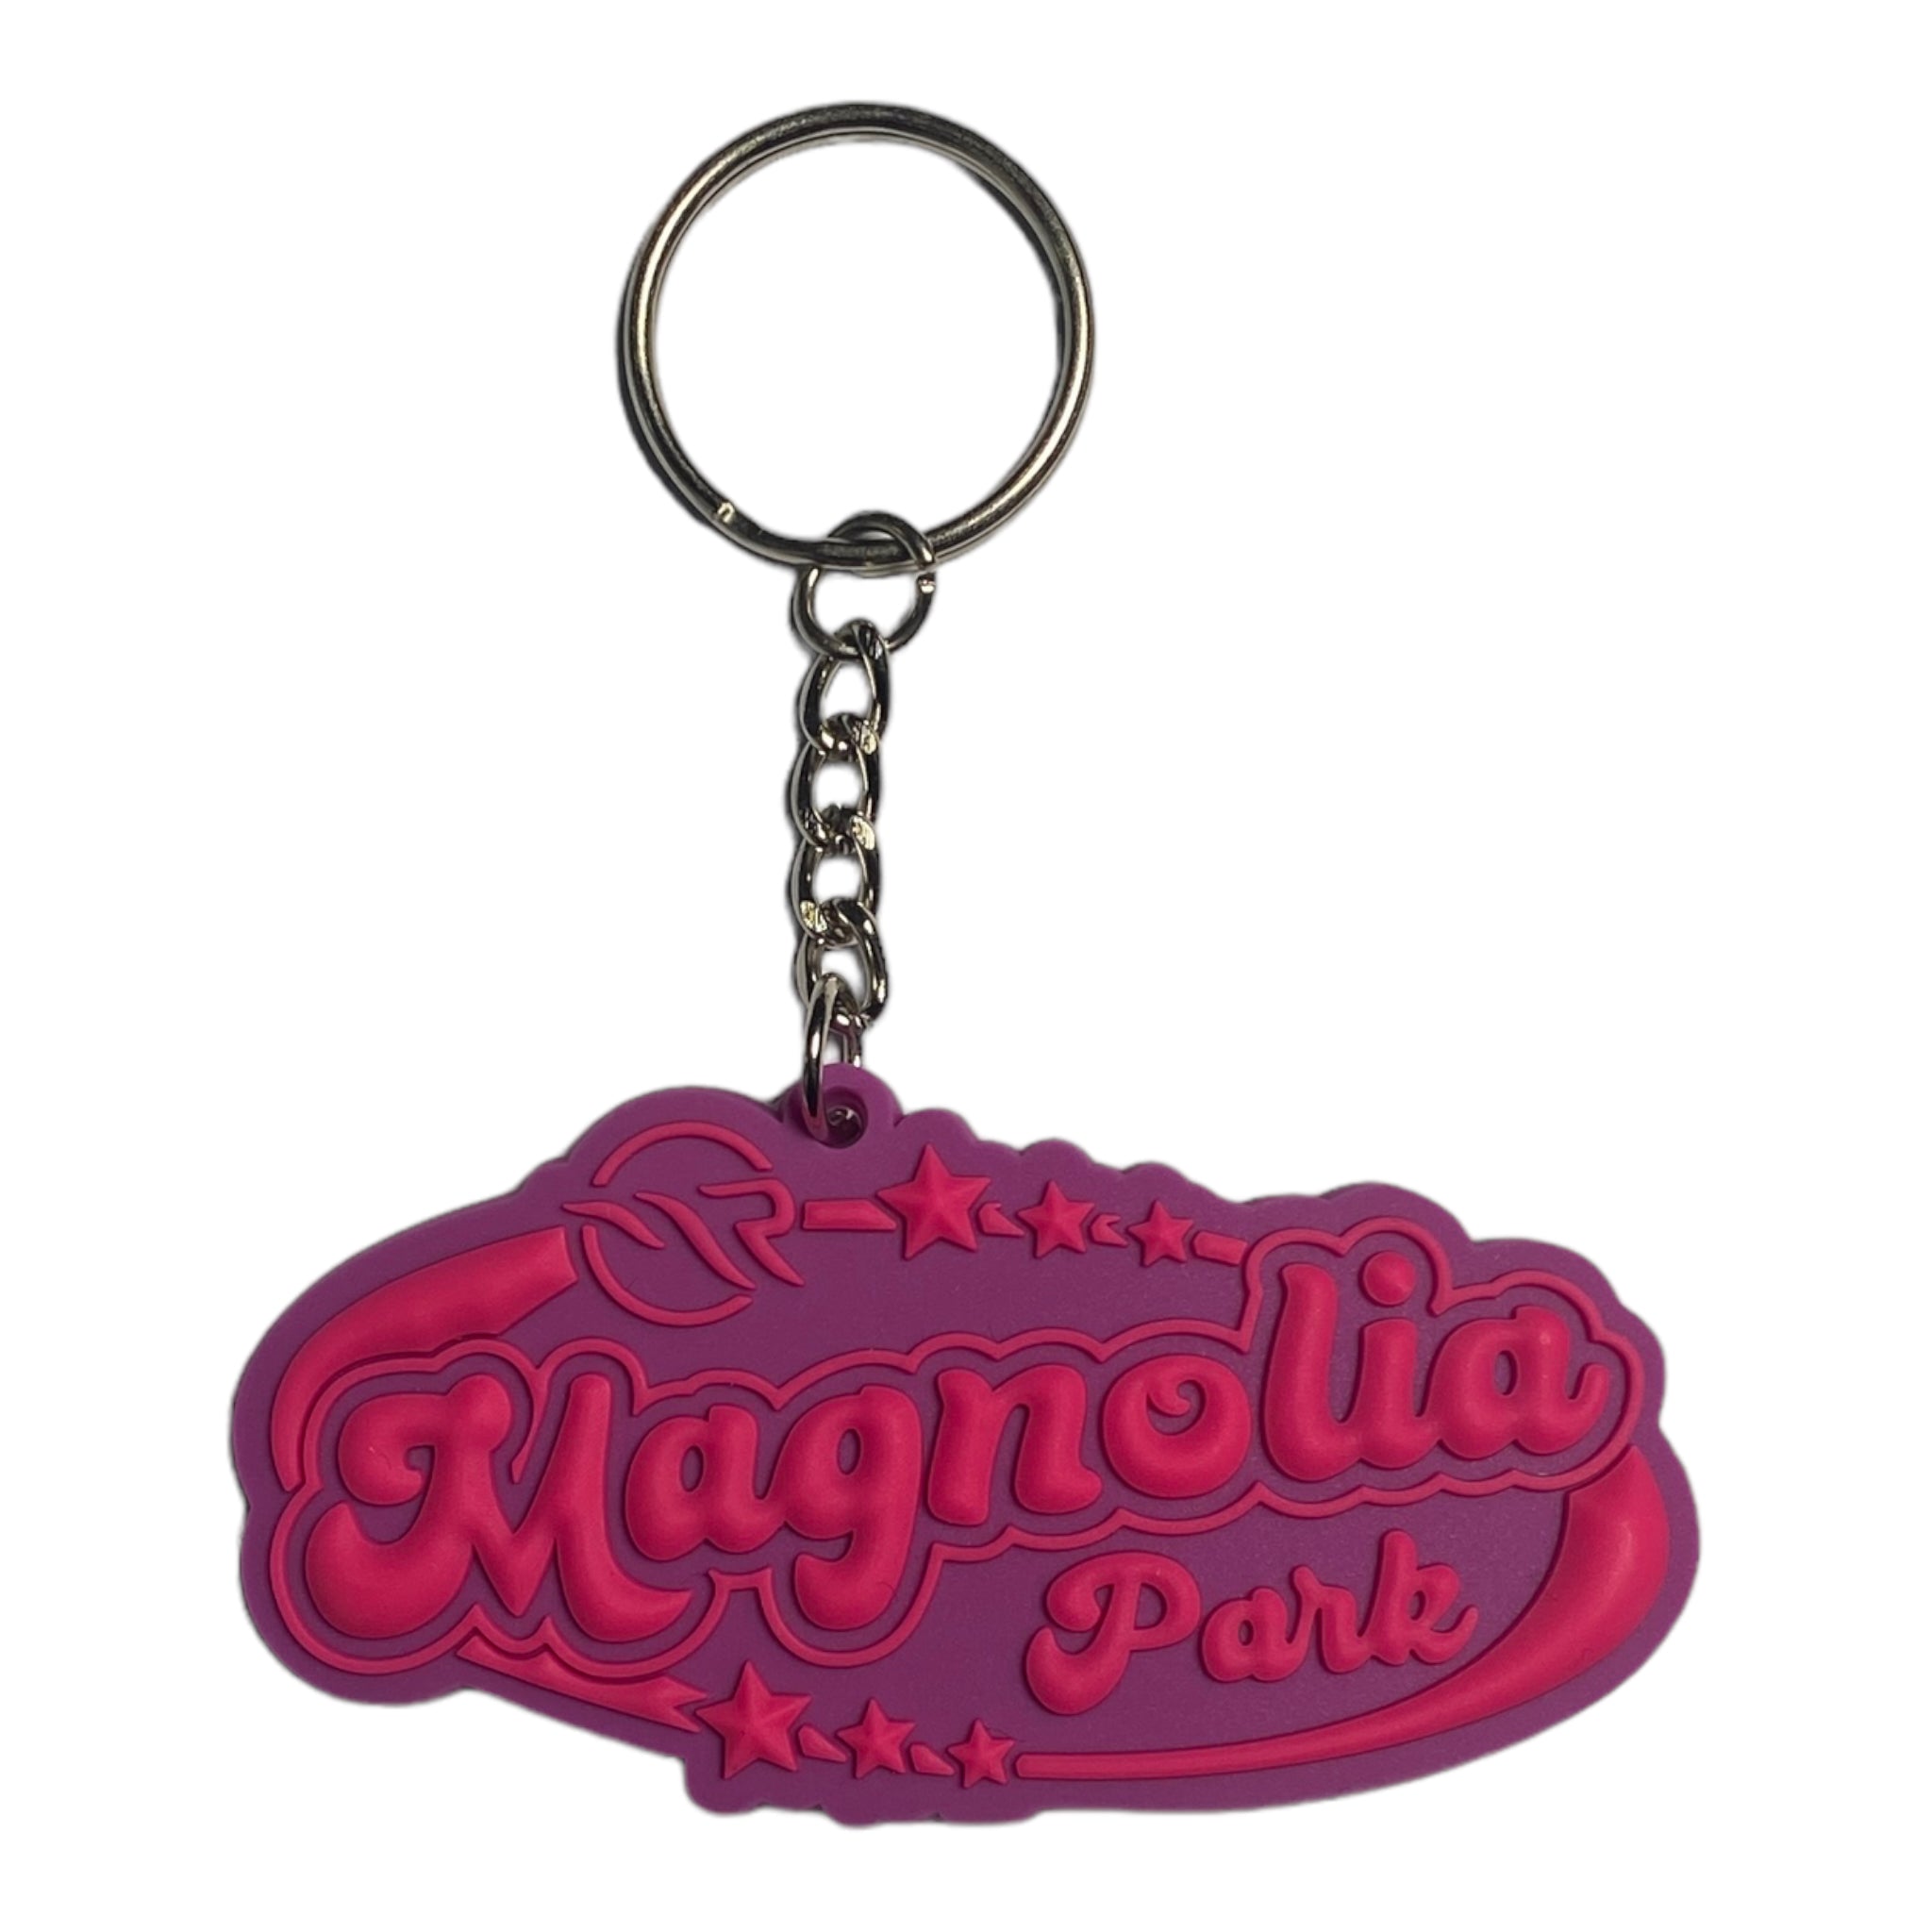 The Magnolia Park Shooting Stars Keychain (Pink)